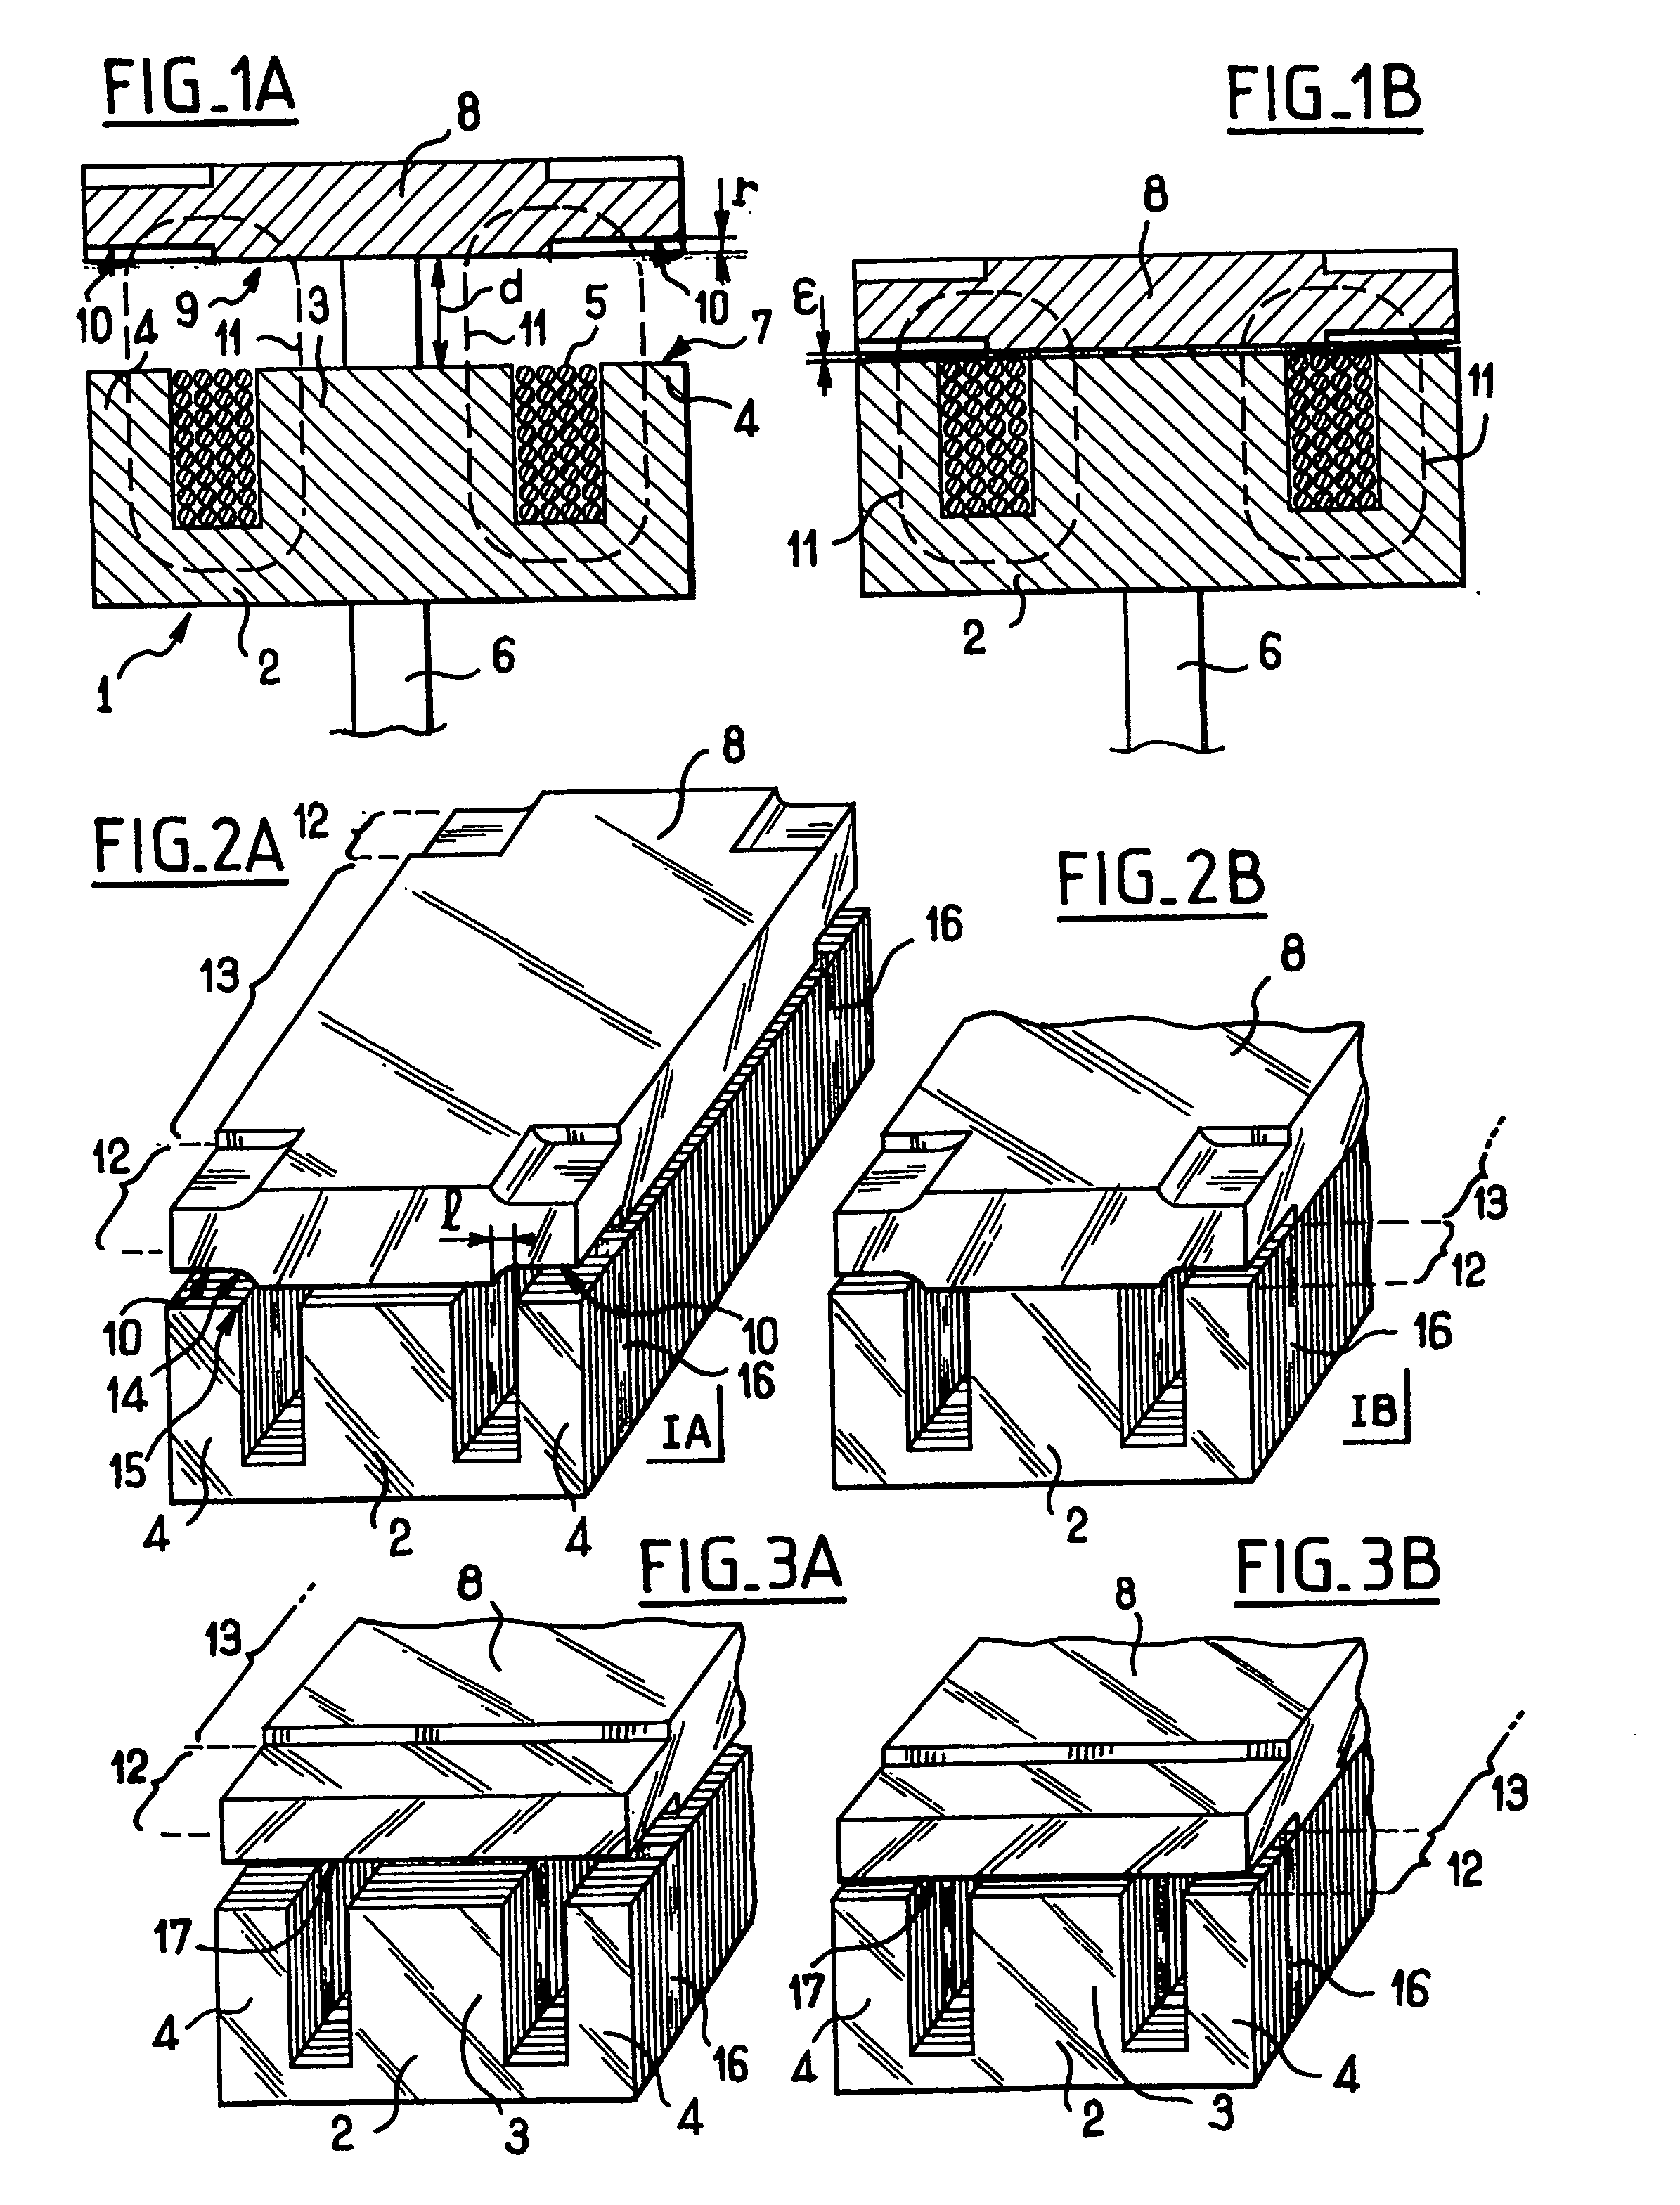 Electromagnetic actuator with controlled attraction force